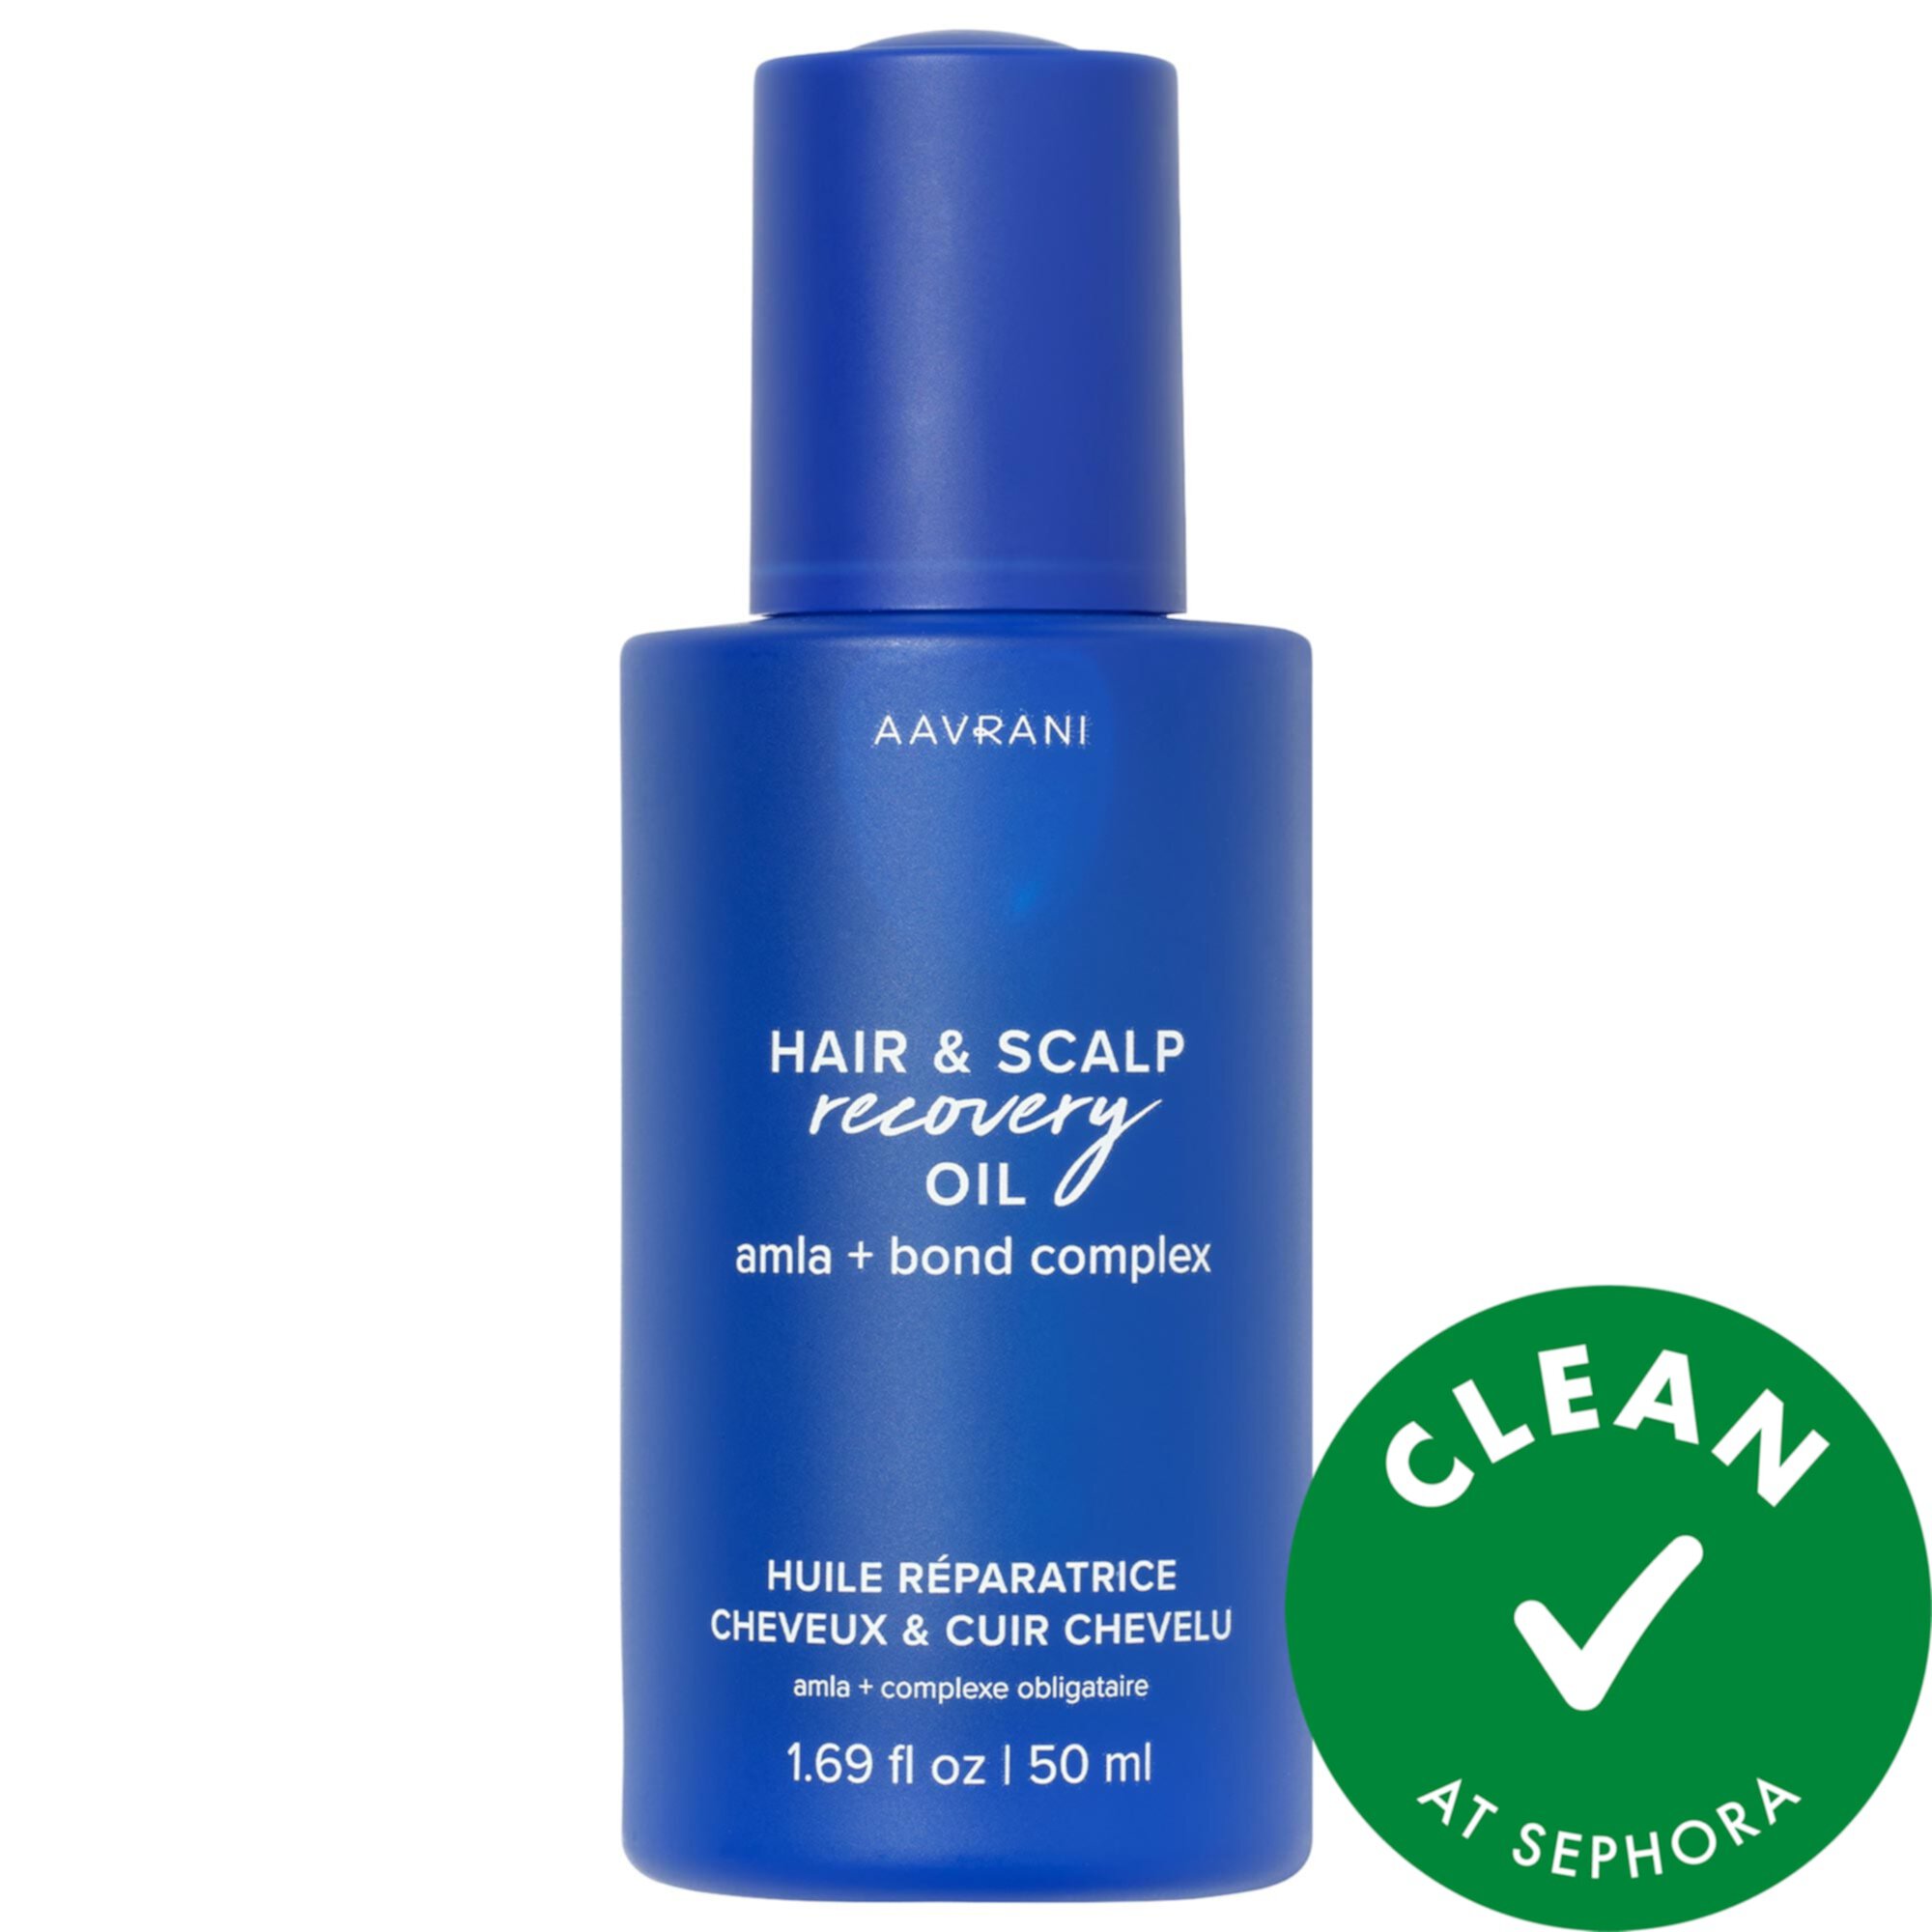 Hair and Scalp Recovery Pre-Wash Oil for Strengthening and Frizz Control AAVRANI